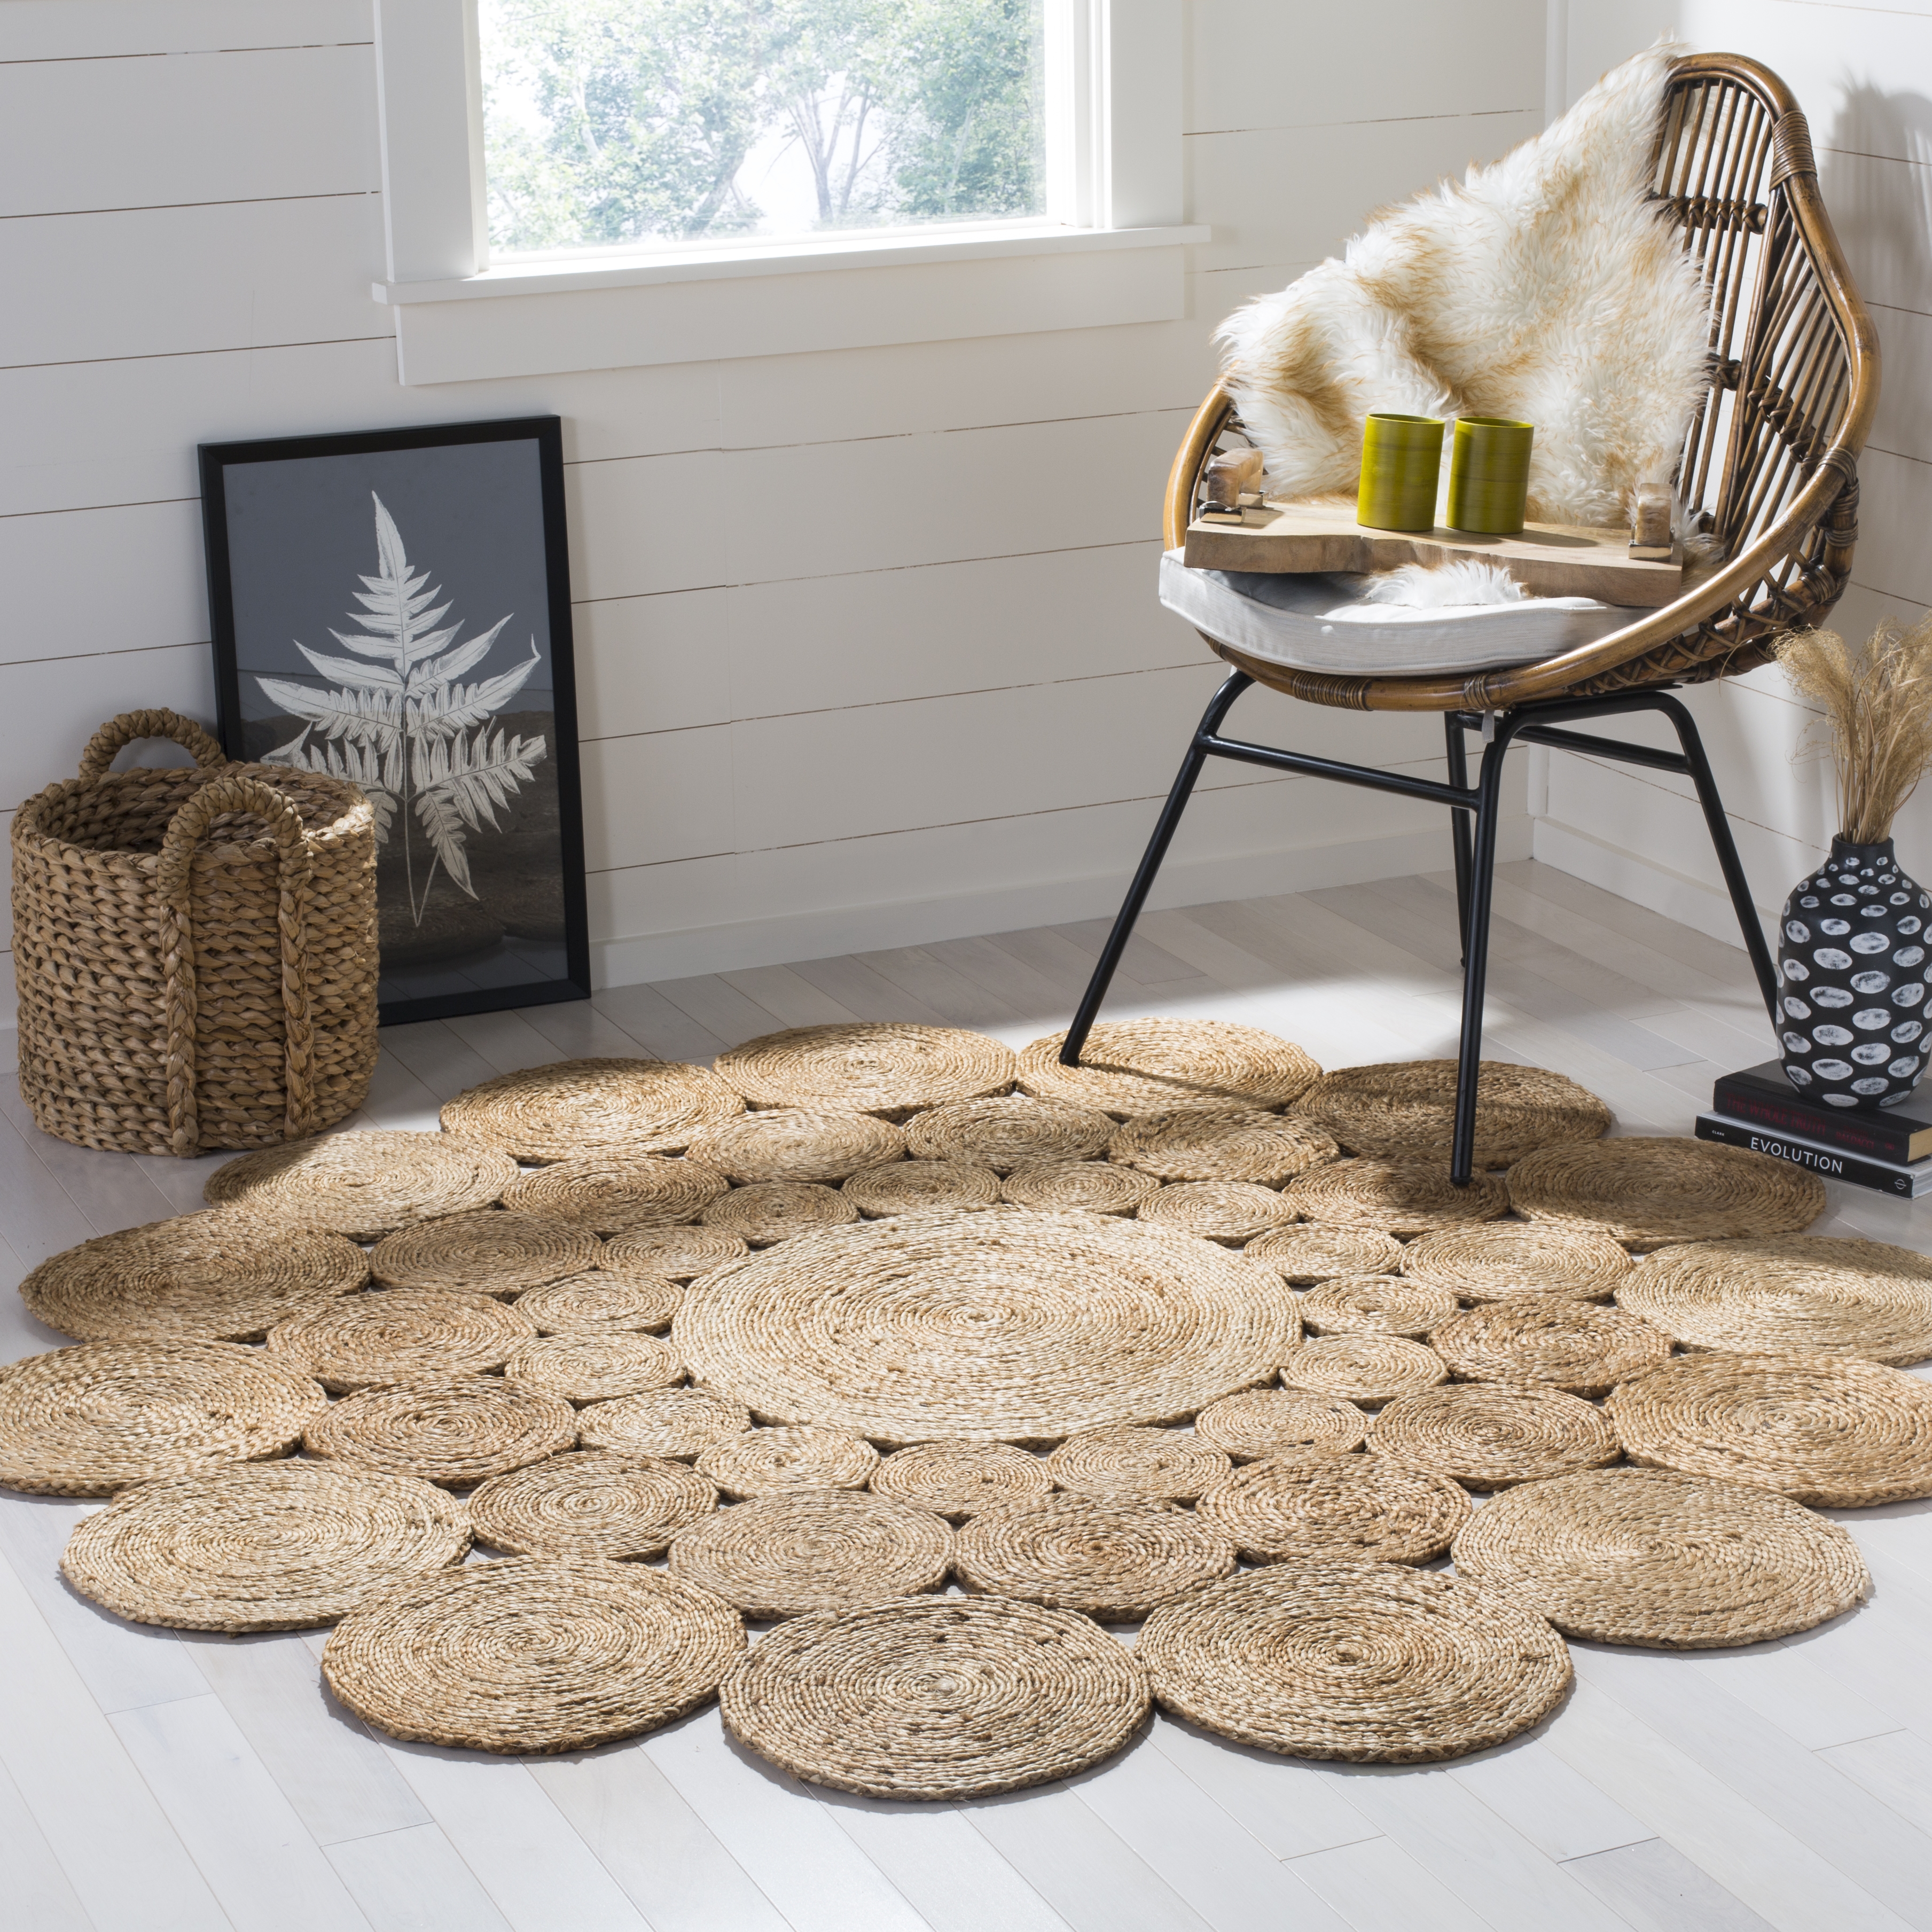 Arlo Home Hand Woven Area Rug, NF363A, Natural,  6' X 6' Round - Image 1